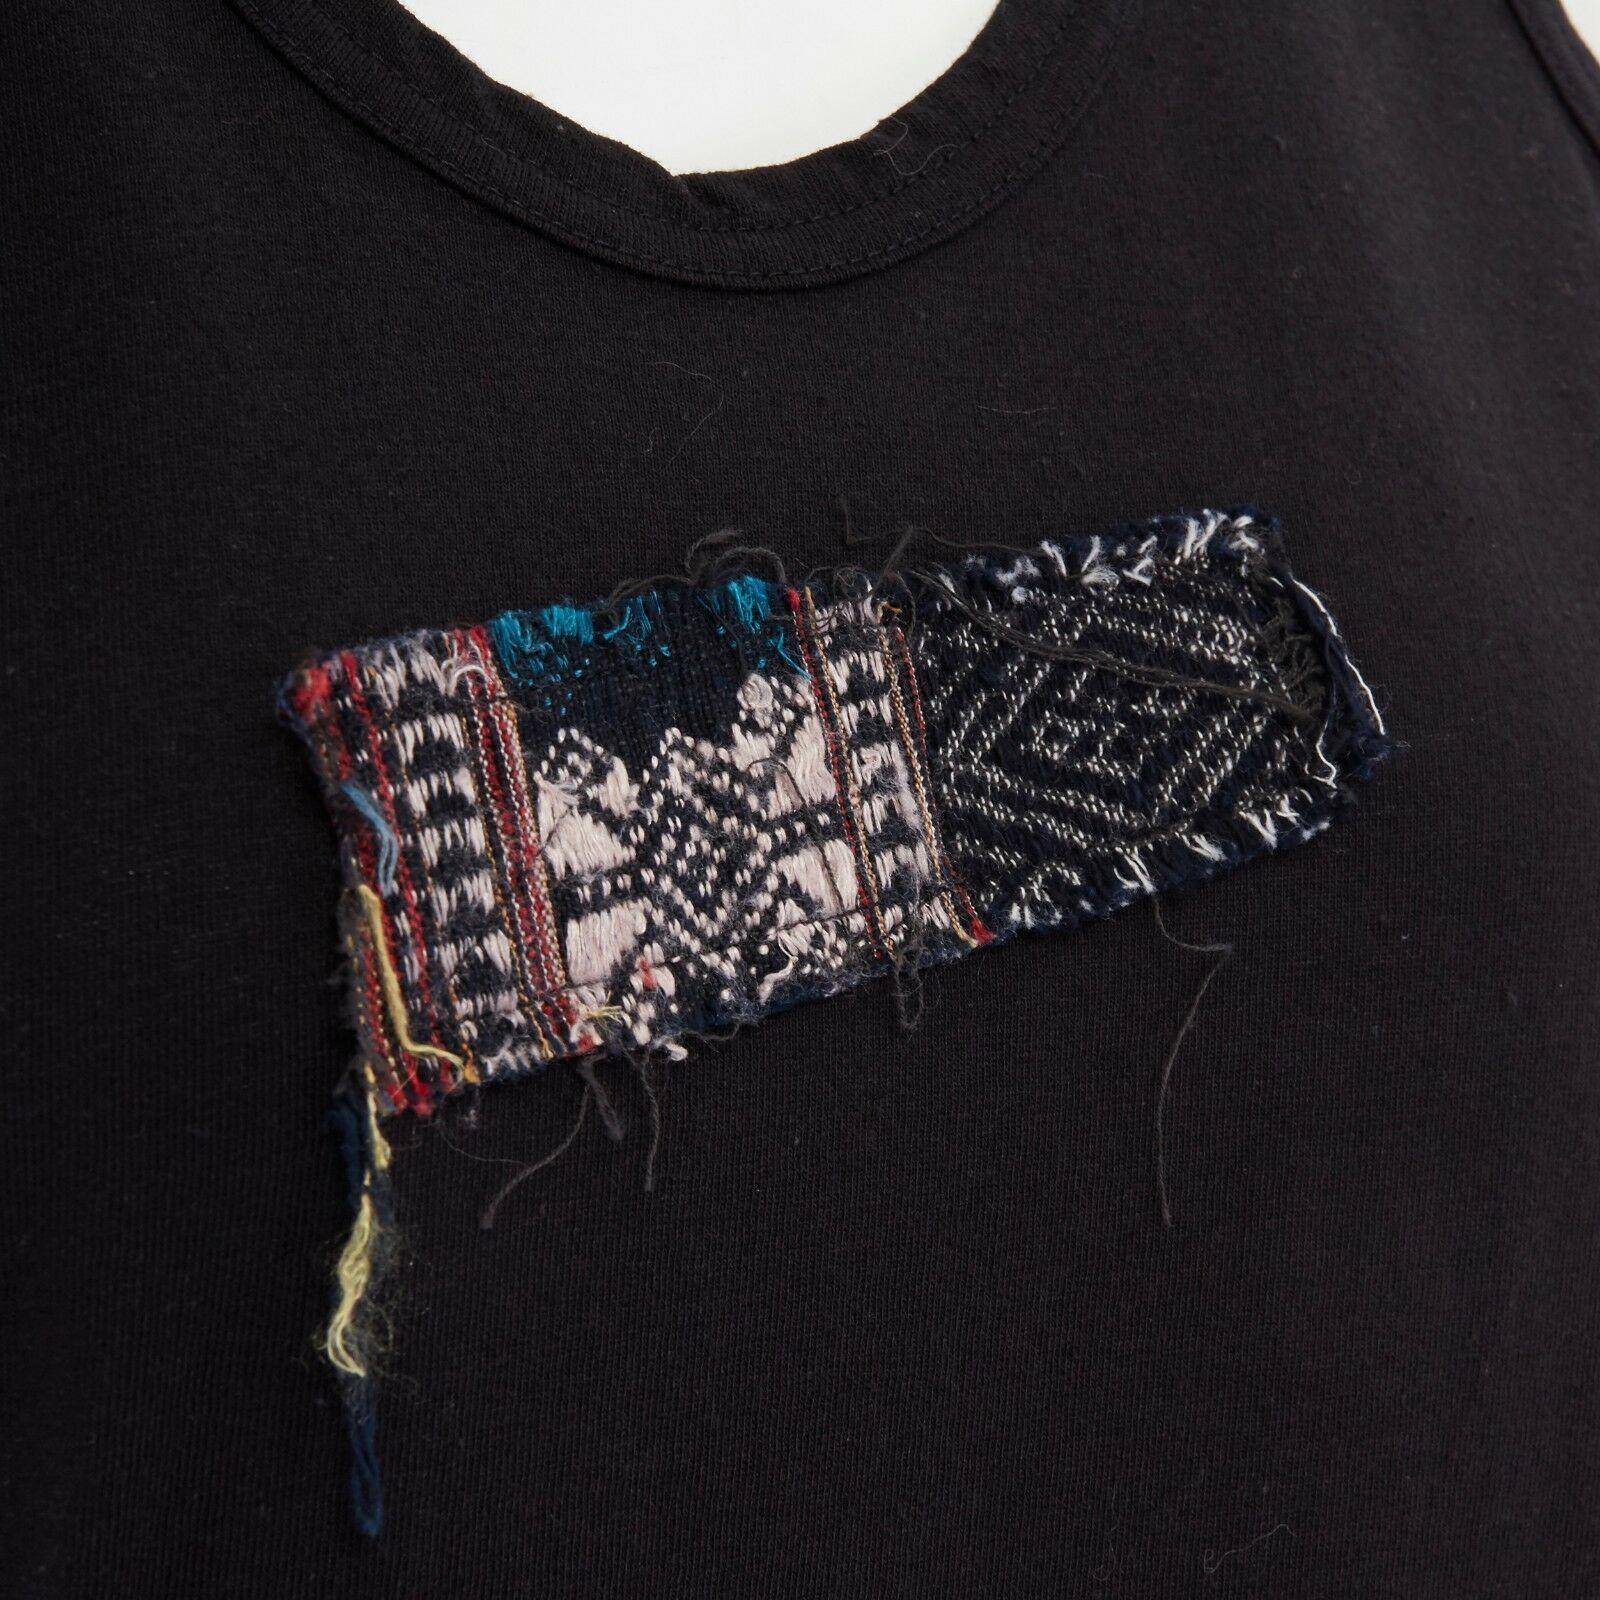 COMME DES GARCONS SS1992 black cotton ethnic raw patch vest tank top S 
AS PART OF SPRING SUMMER 1992
Brand: COMME DES GARCONS
Material: Cotton
Color: Black
Extra Details: Black cotton. Multicolor ethnic embroidered raw edge patch detail at front.